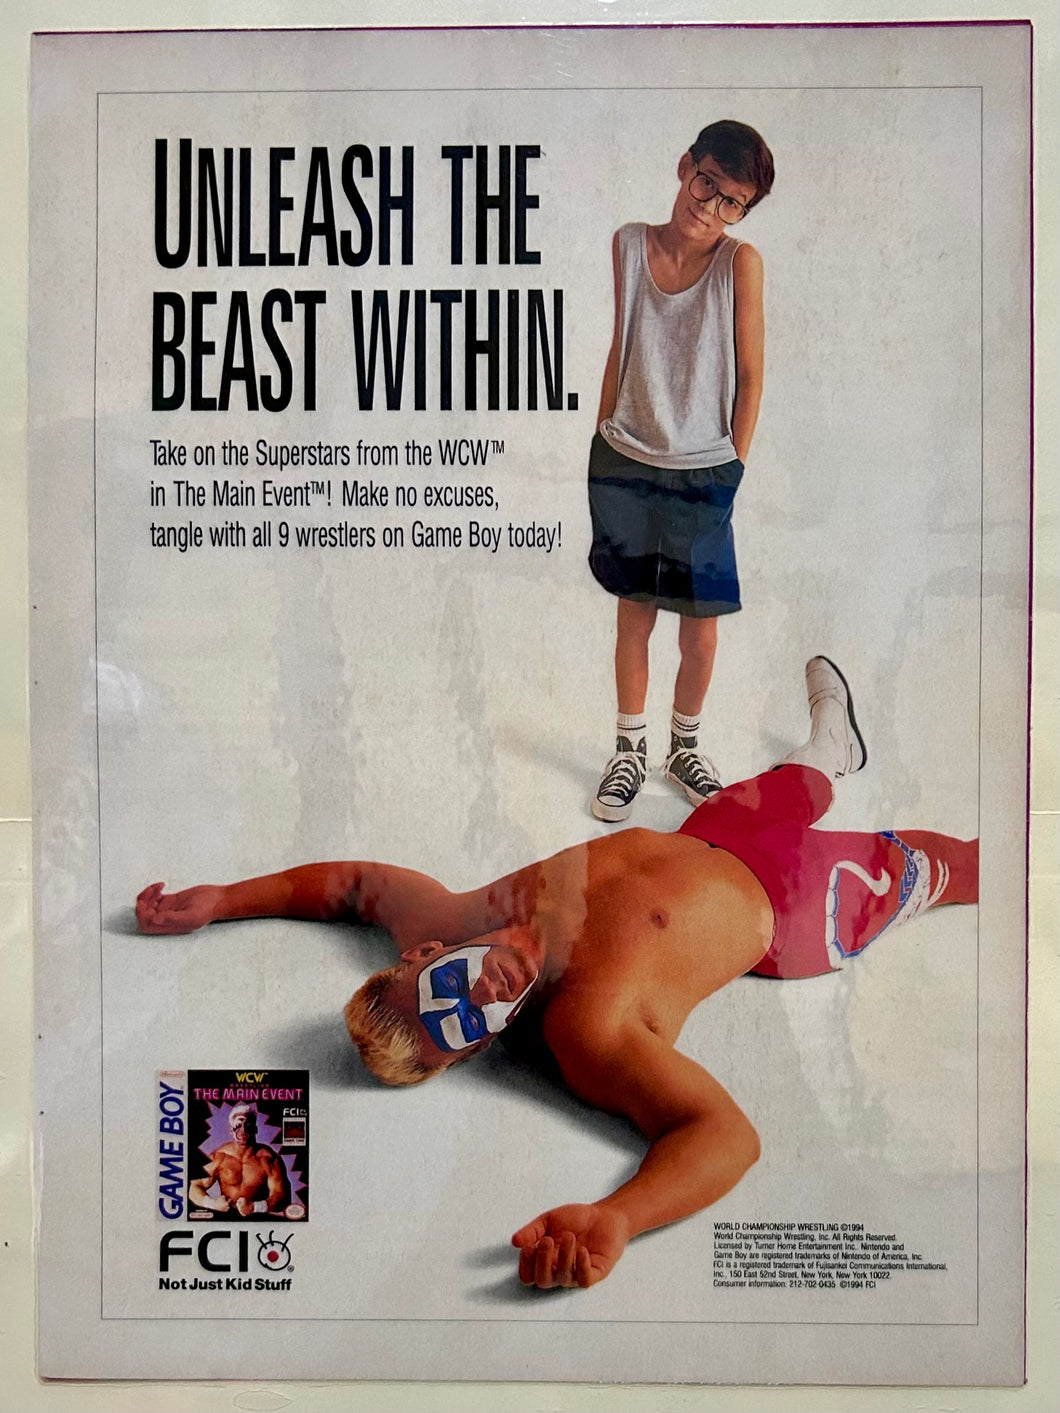 WCW: The Main Event - GameBoy - Original Vintage Advertisement - Print Ads - Laminated A4 Poster